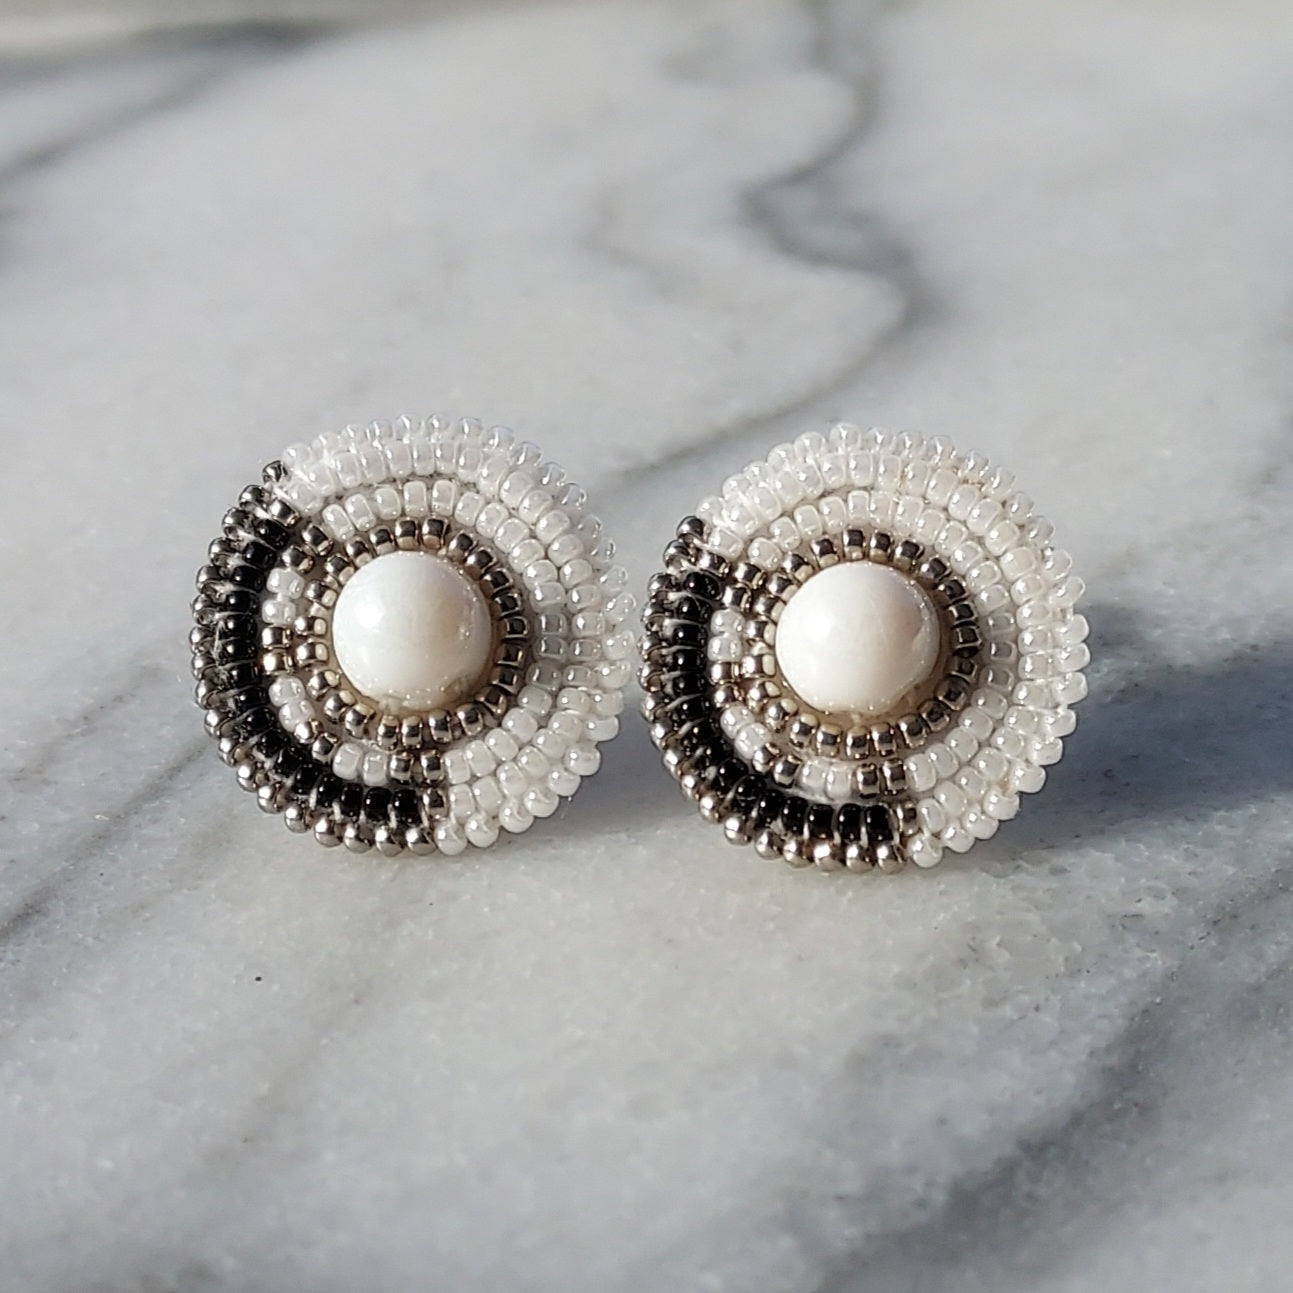 Cheyanne Symone’s Little Ash Earrings Sitting in a Marble Tray | Black and White Glass Seed Bead Earrings Featuring Metal Plated Beads Wrapped Around a Glass Bead Center